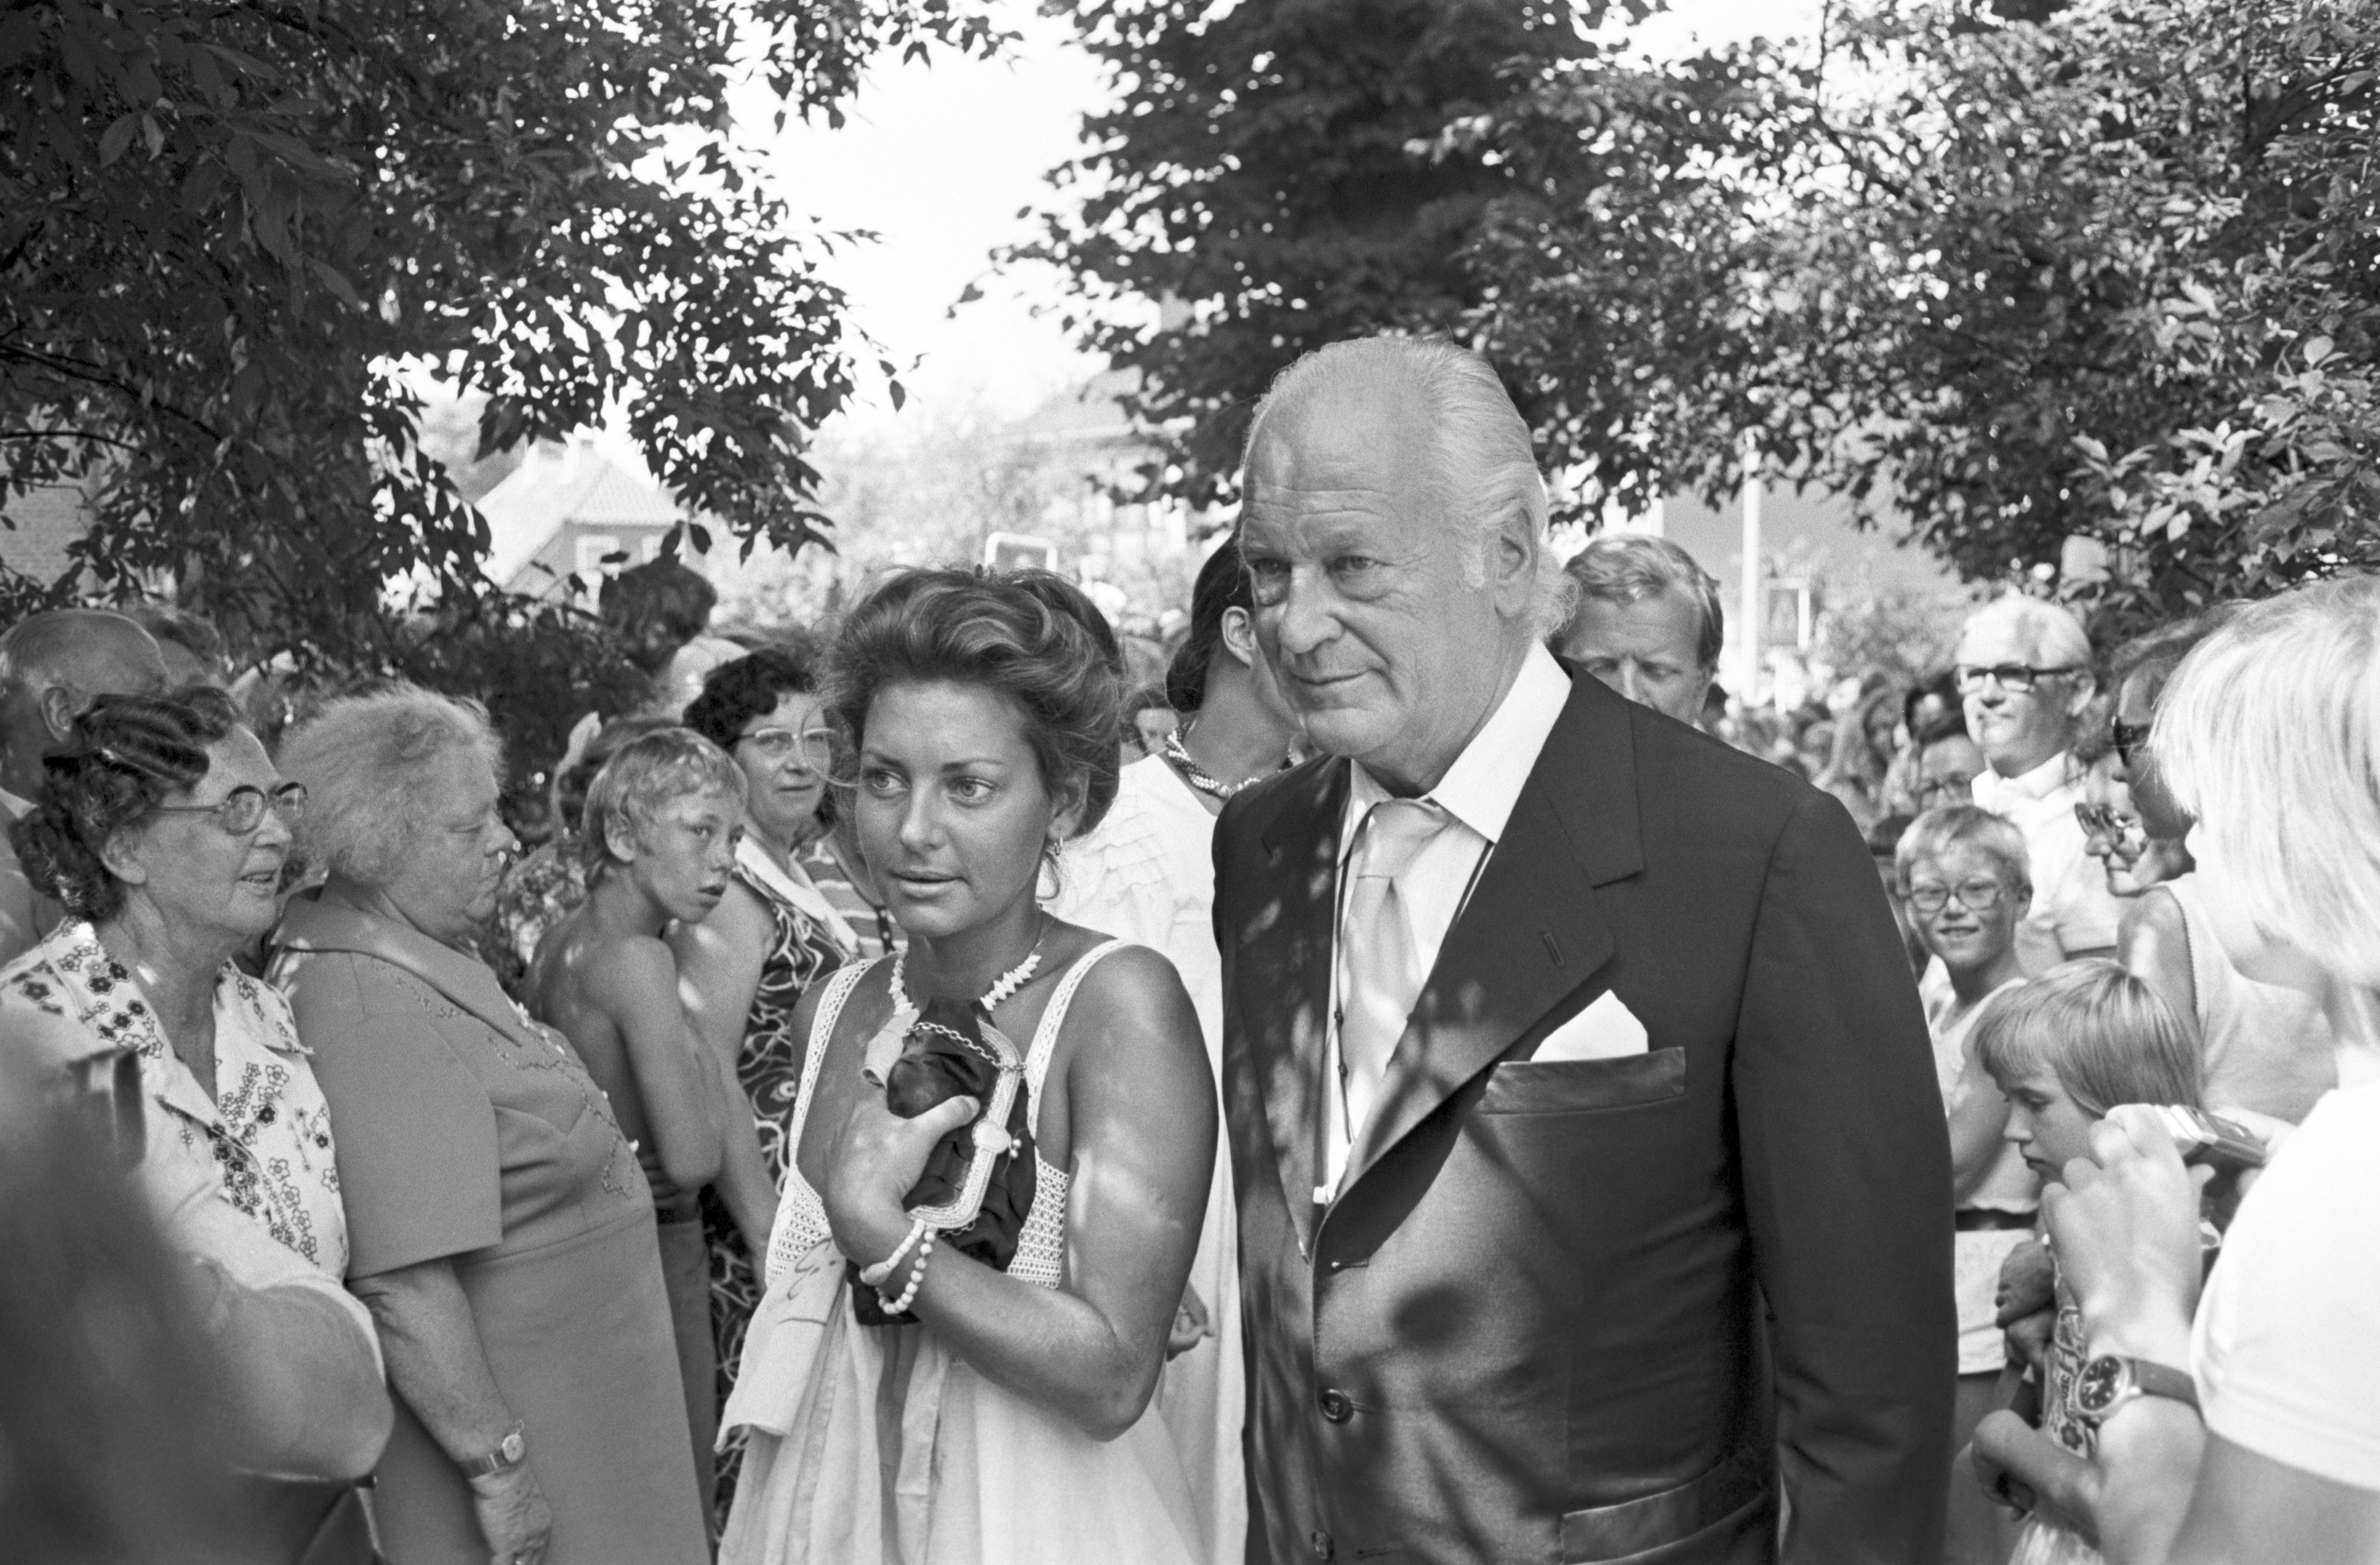 Marlene Knaus and Curt Jurgens at a wedding event on August 9, 1975 in Hamburg, Germany. | Source: Getty Images